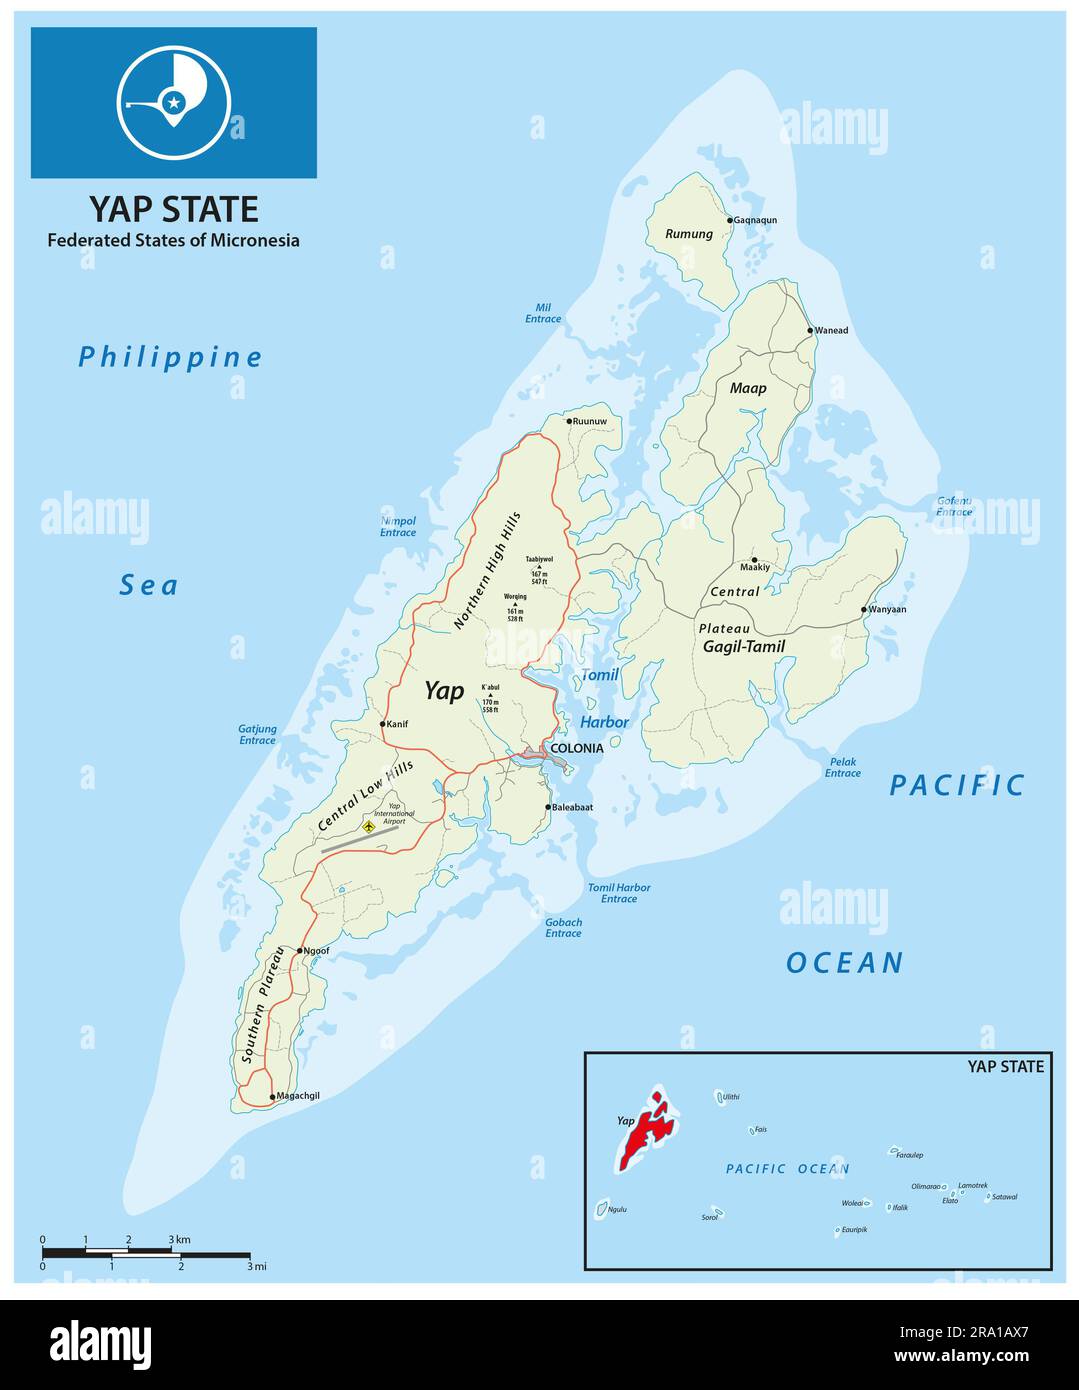 Road map of the island of Yap, Federated States of Micronesia Stock Photo